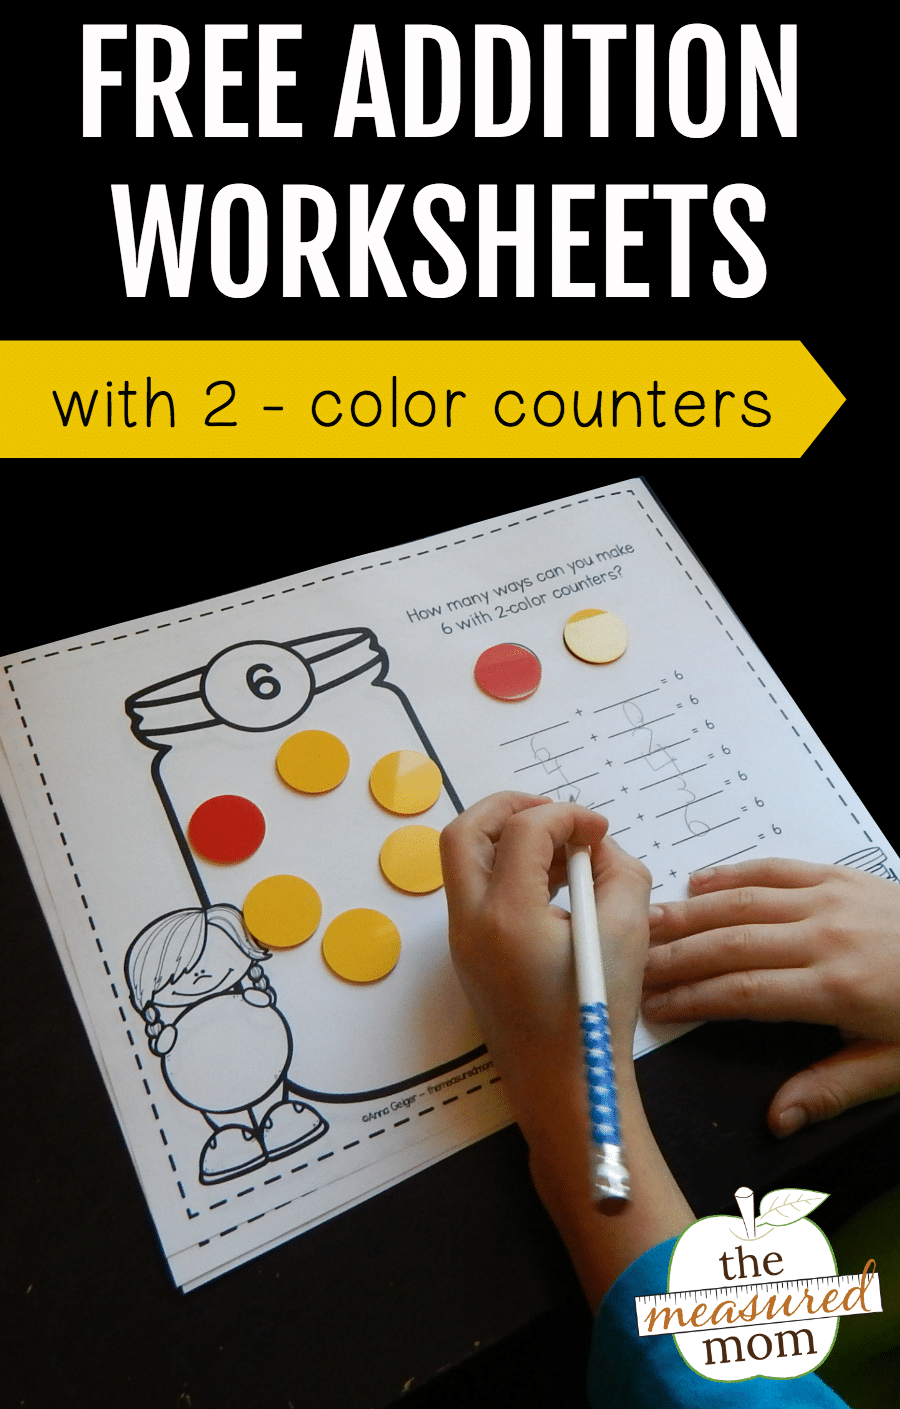 Free addition worksheets with 2-color counters - The Measured Mom